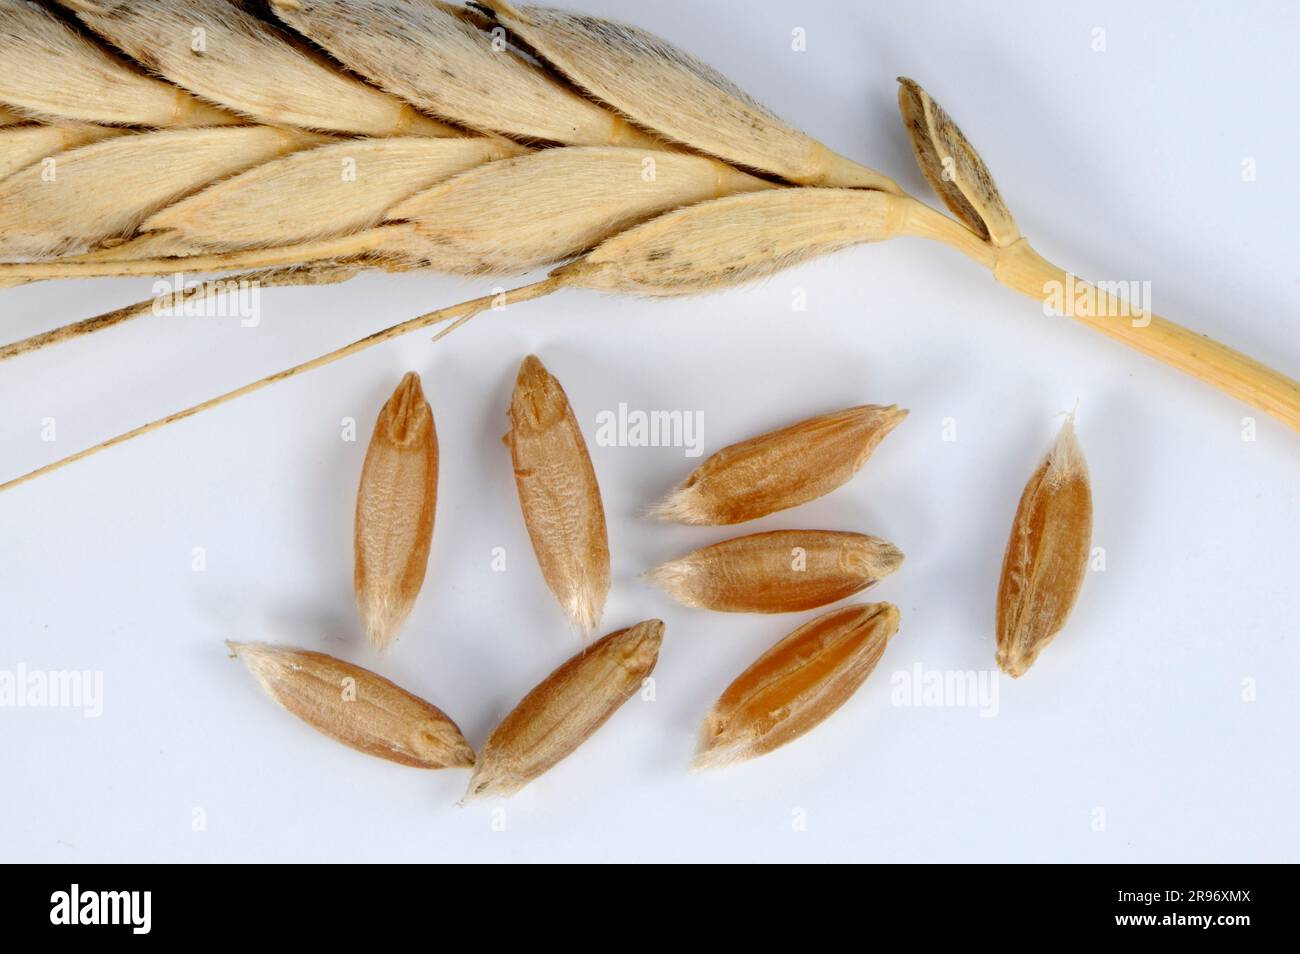 Wild emmer (Triticum dicoccoides dicoccoides), emmer kernels, cereal grains Stock Photo